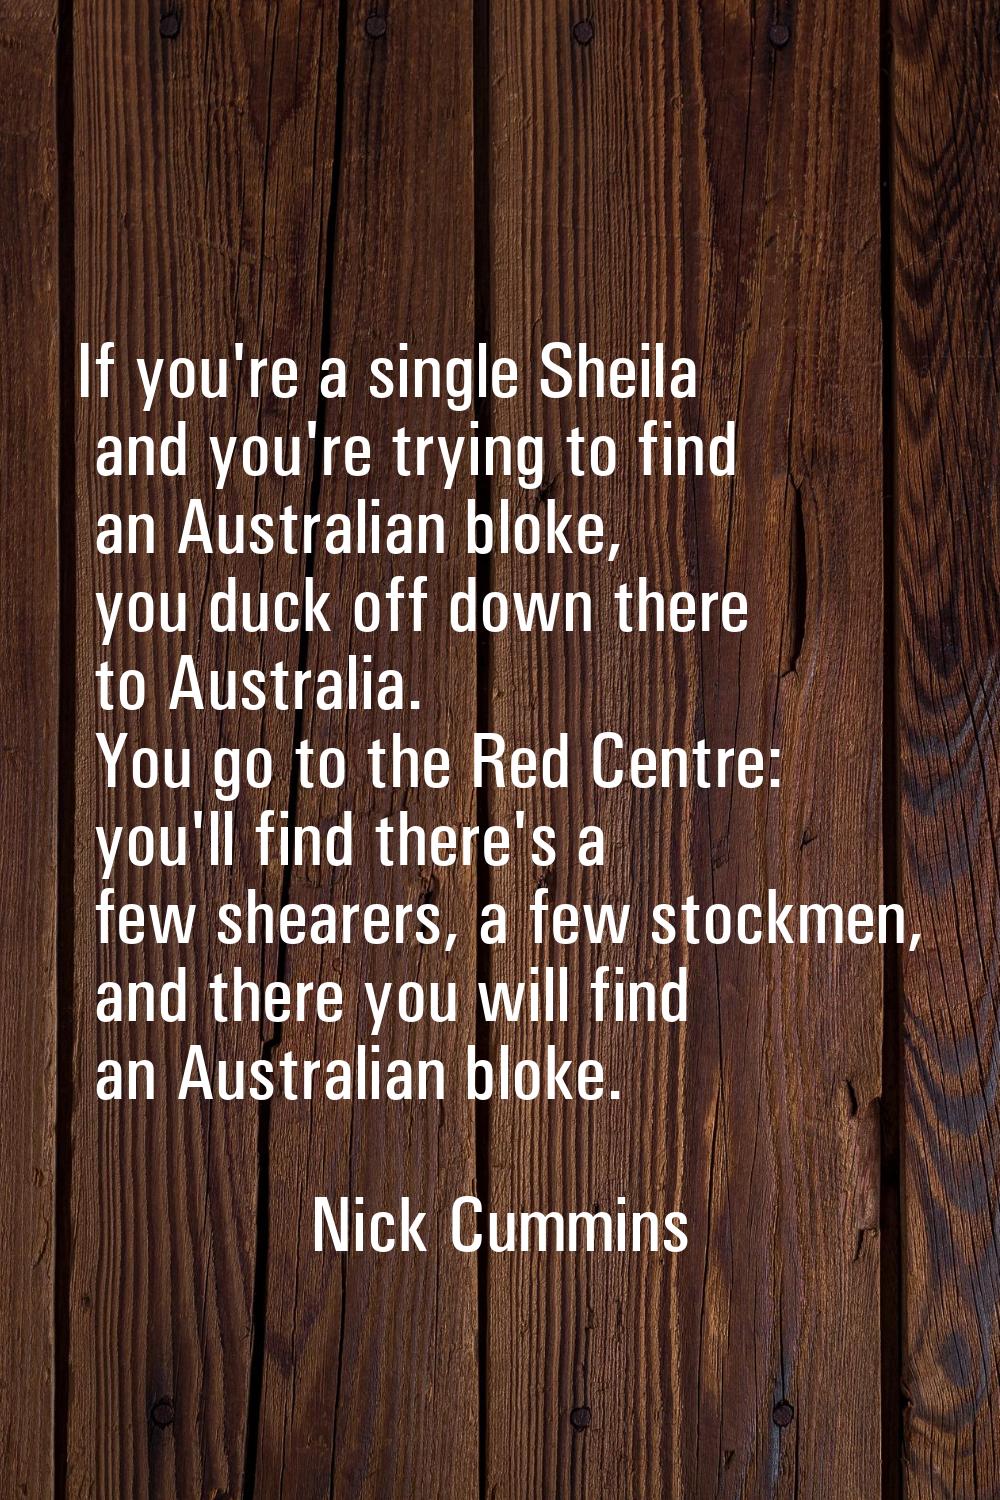 If you're a single Sheila and you're trying to find an Australian bloke, you duck off down there to